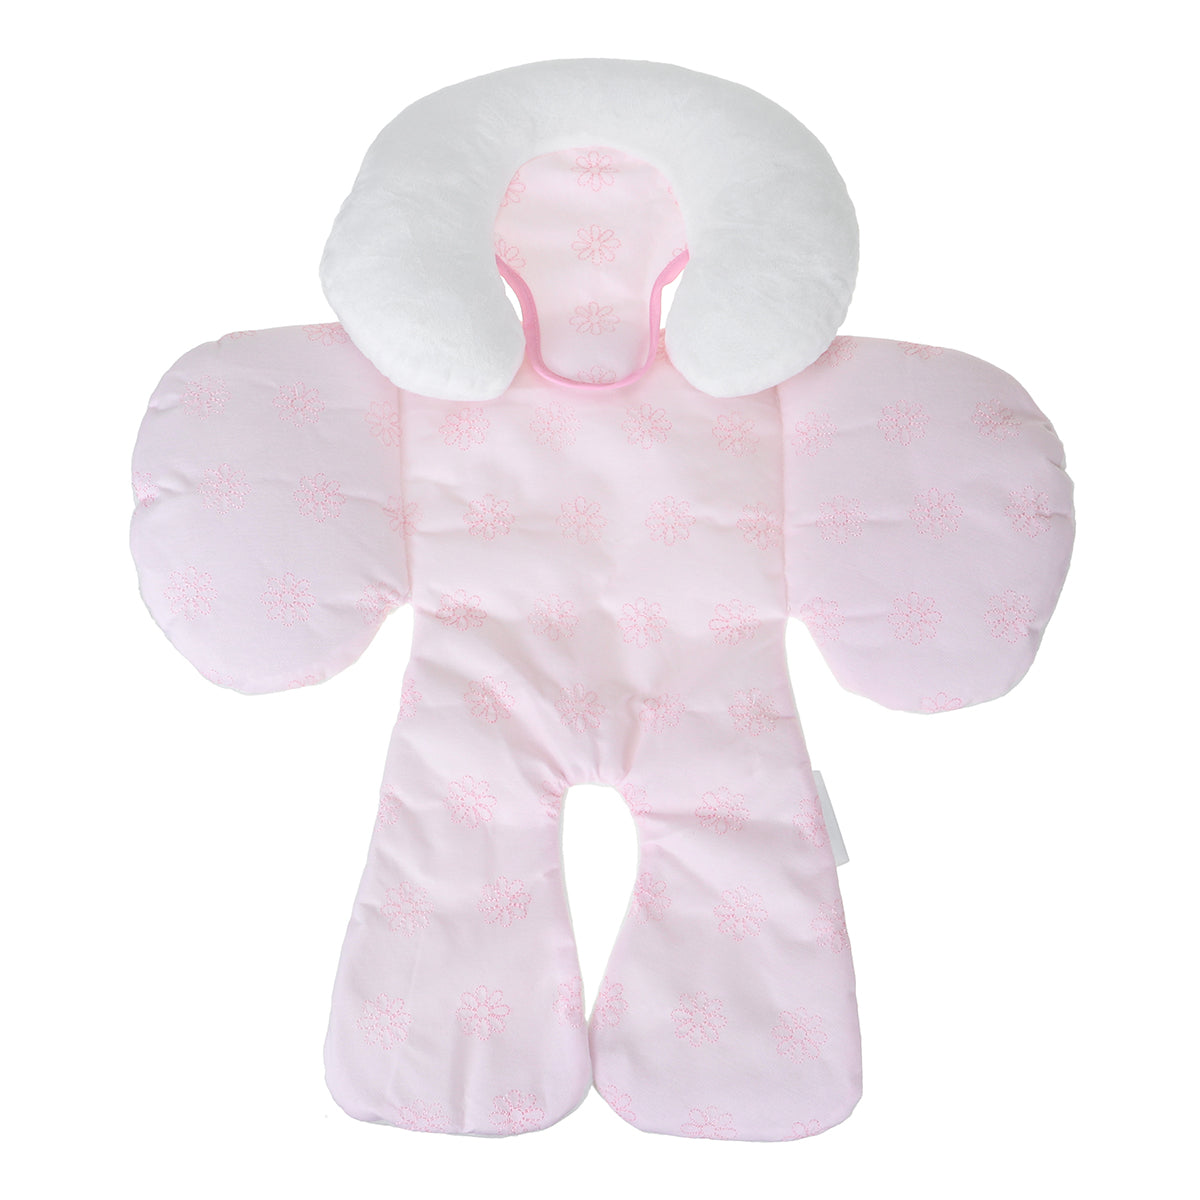 Lavender Baby Car Seat Cotton Mat Safety Body Soft Cushion Pad Pillow Child Seat Chair Protection